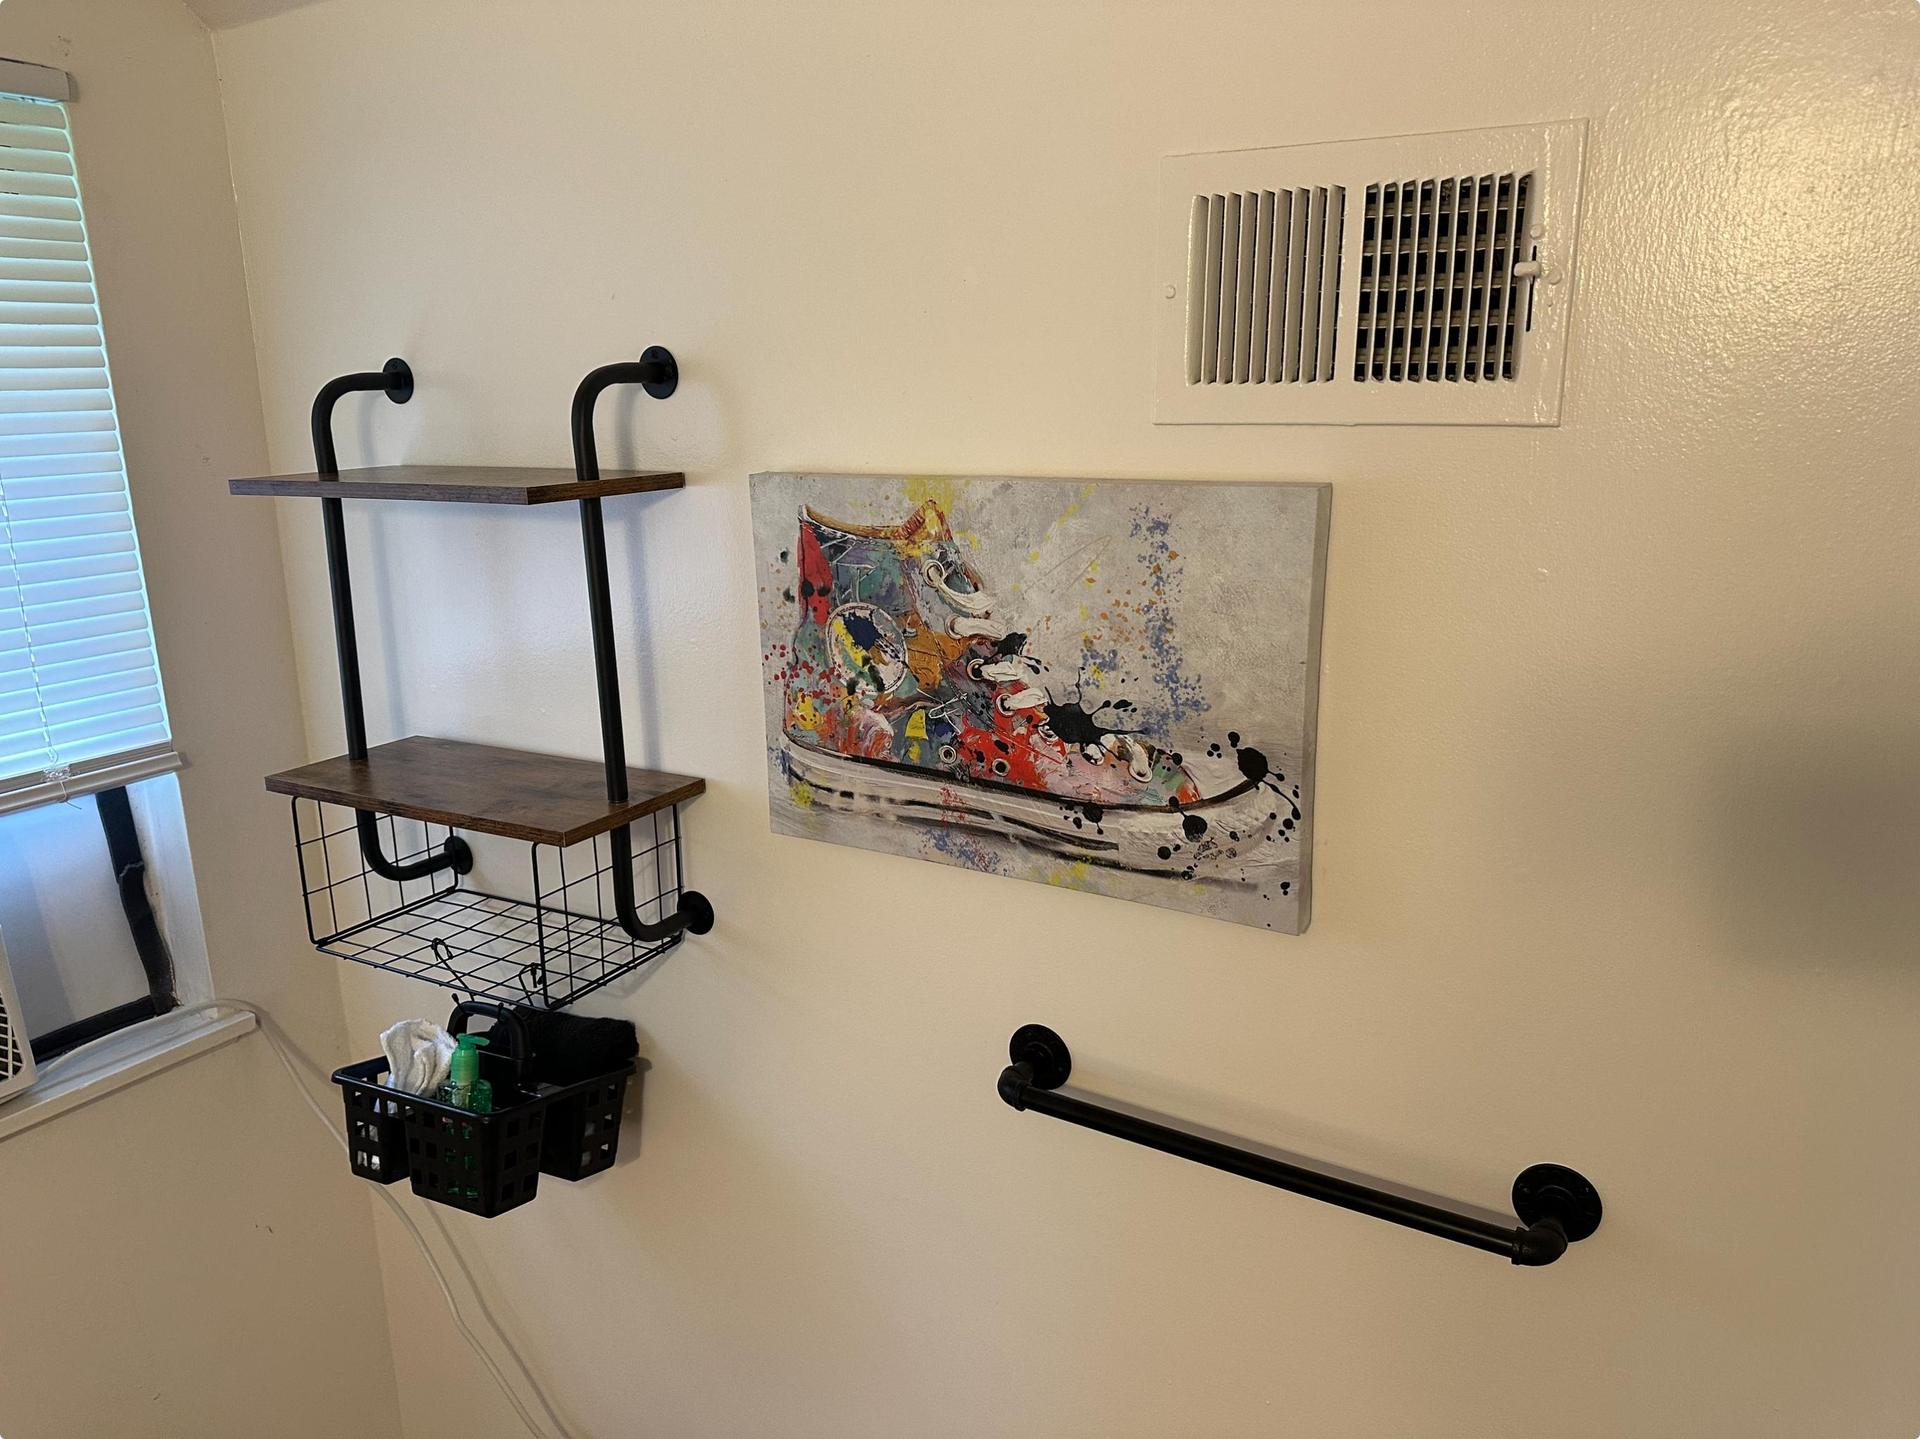 All rooms have a Towel Bar, Coat Hooks, Display Shelf, Artwork, and More!